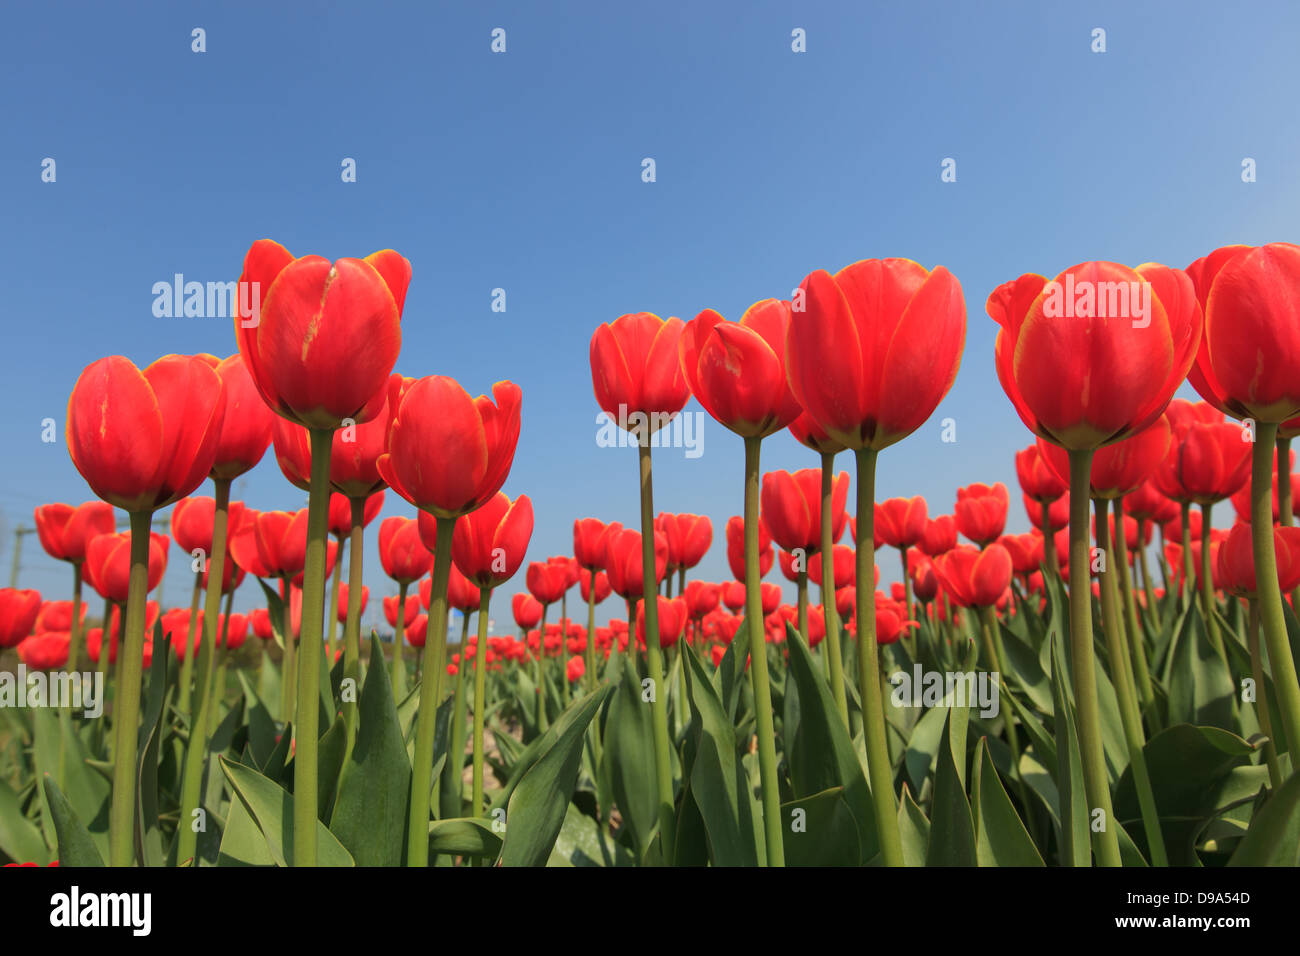 Close up of red tulips with green leaves and stems against a bright blue sky Stock Photo